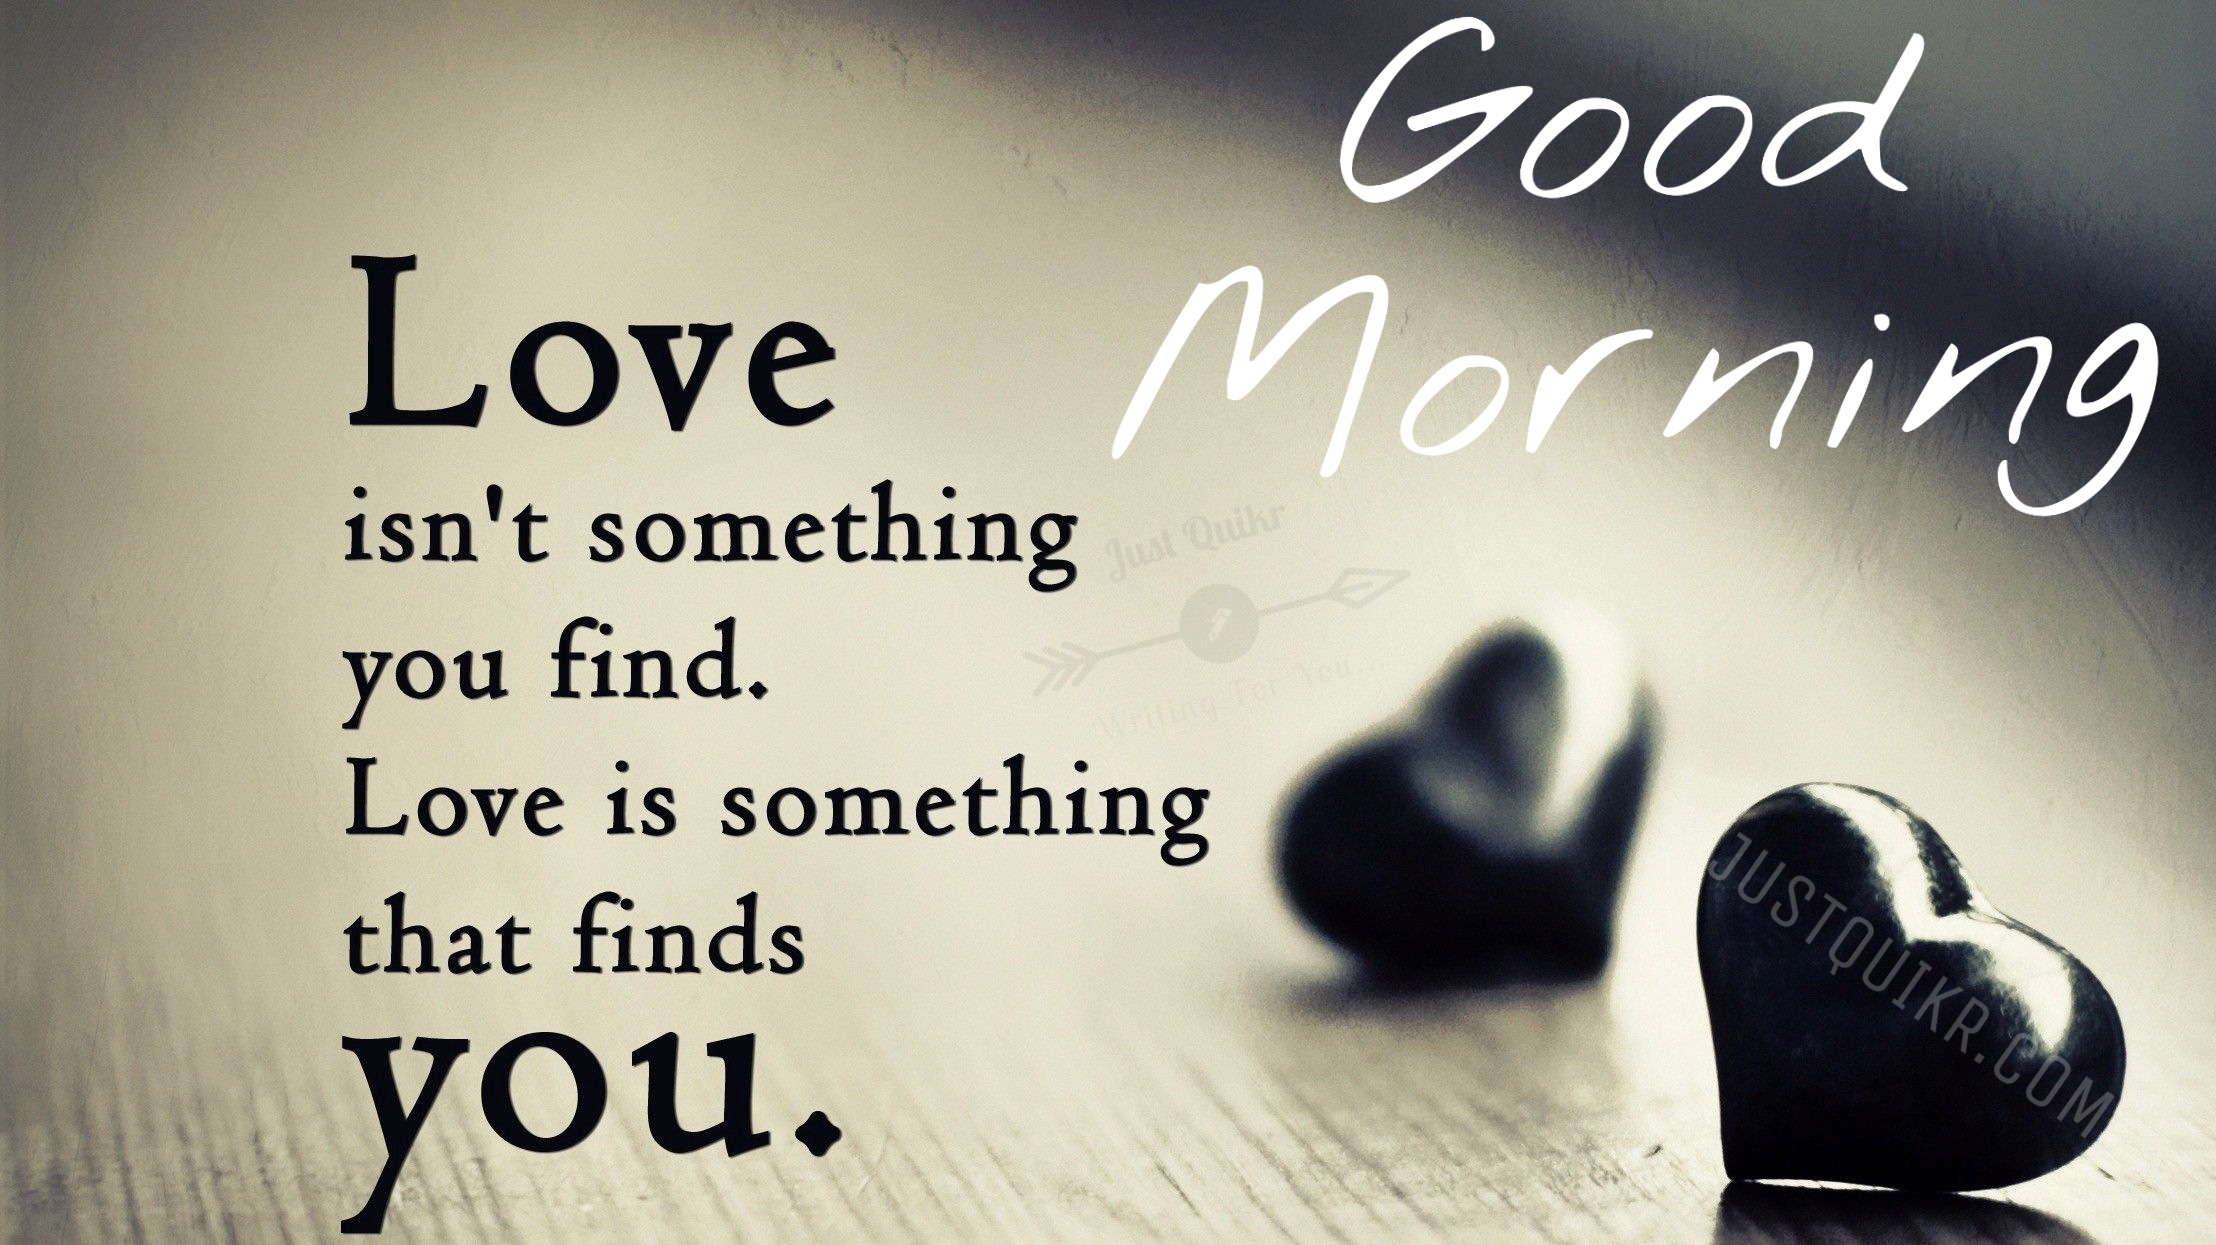 Good Morning Love Quotes Pics Images Photo Wallpaper